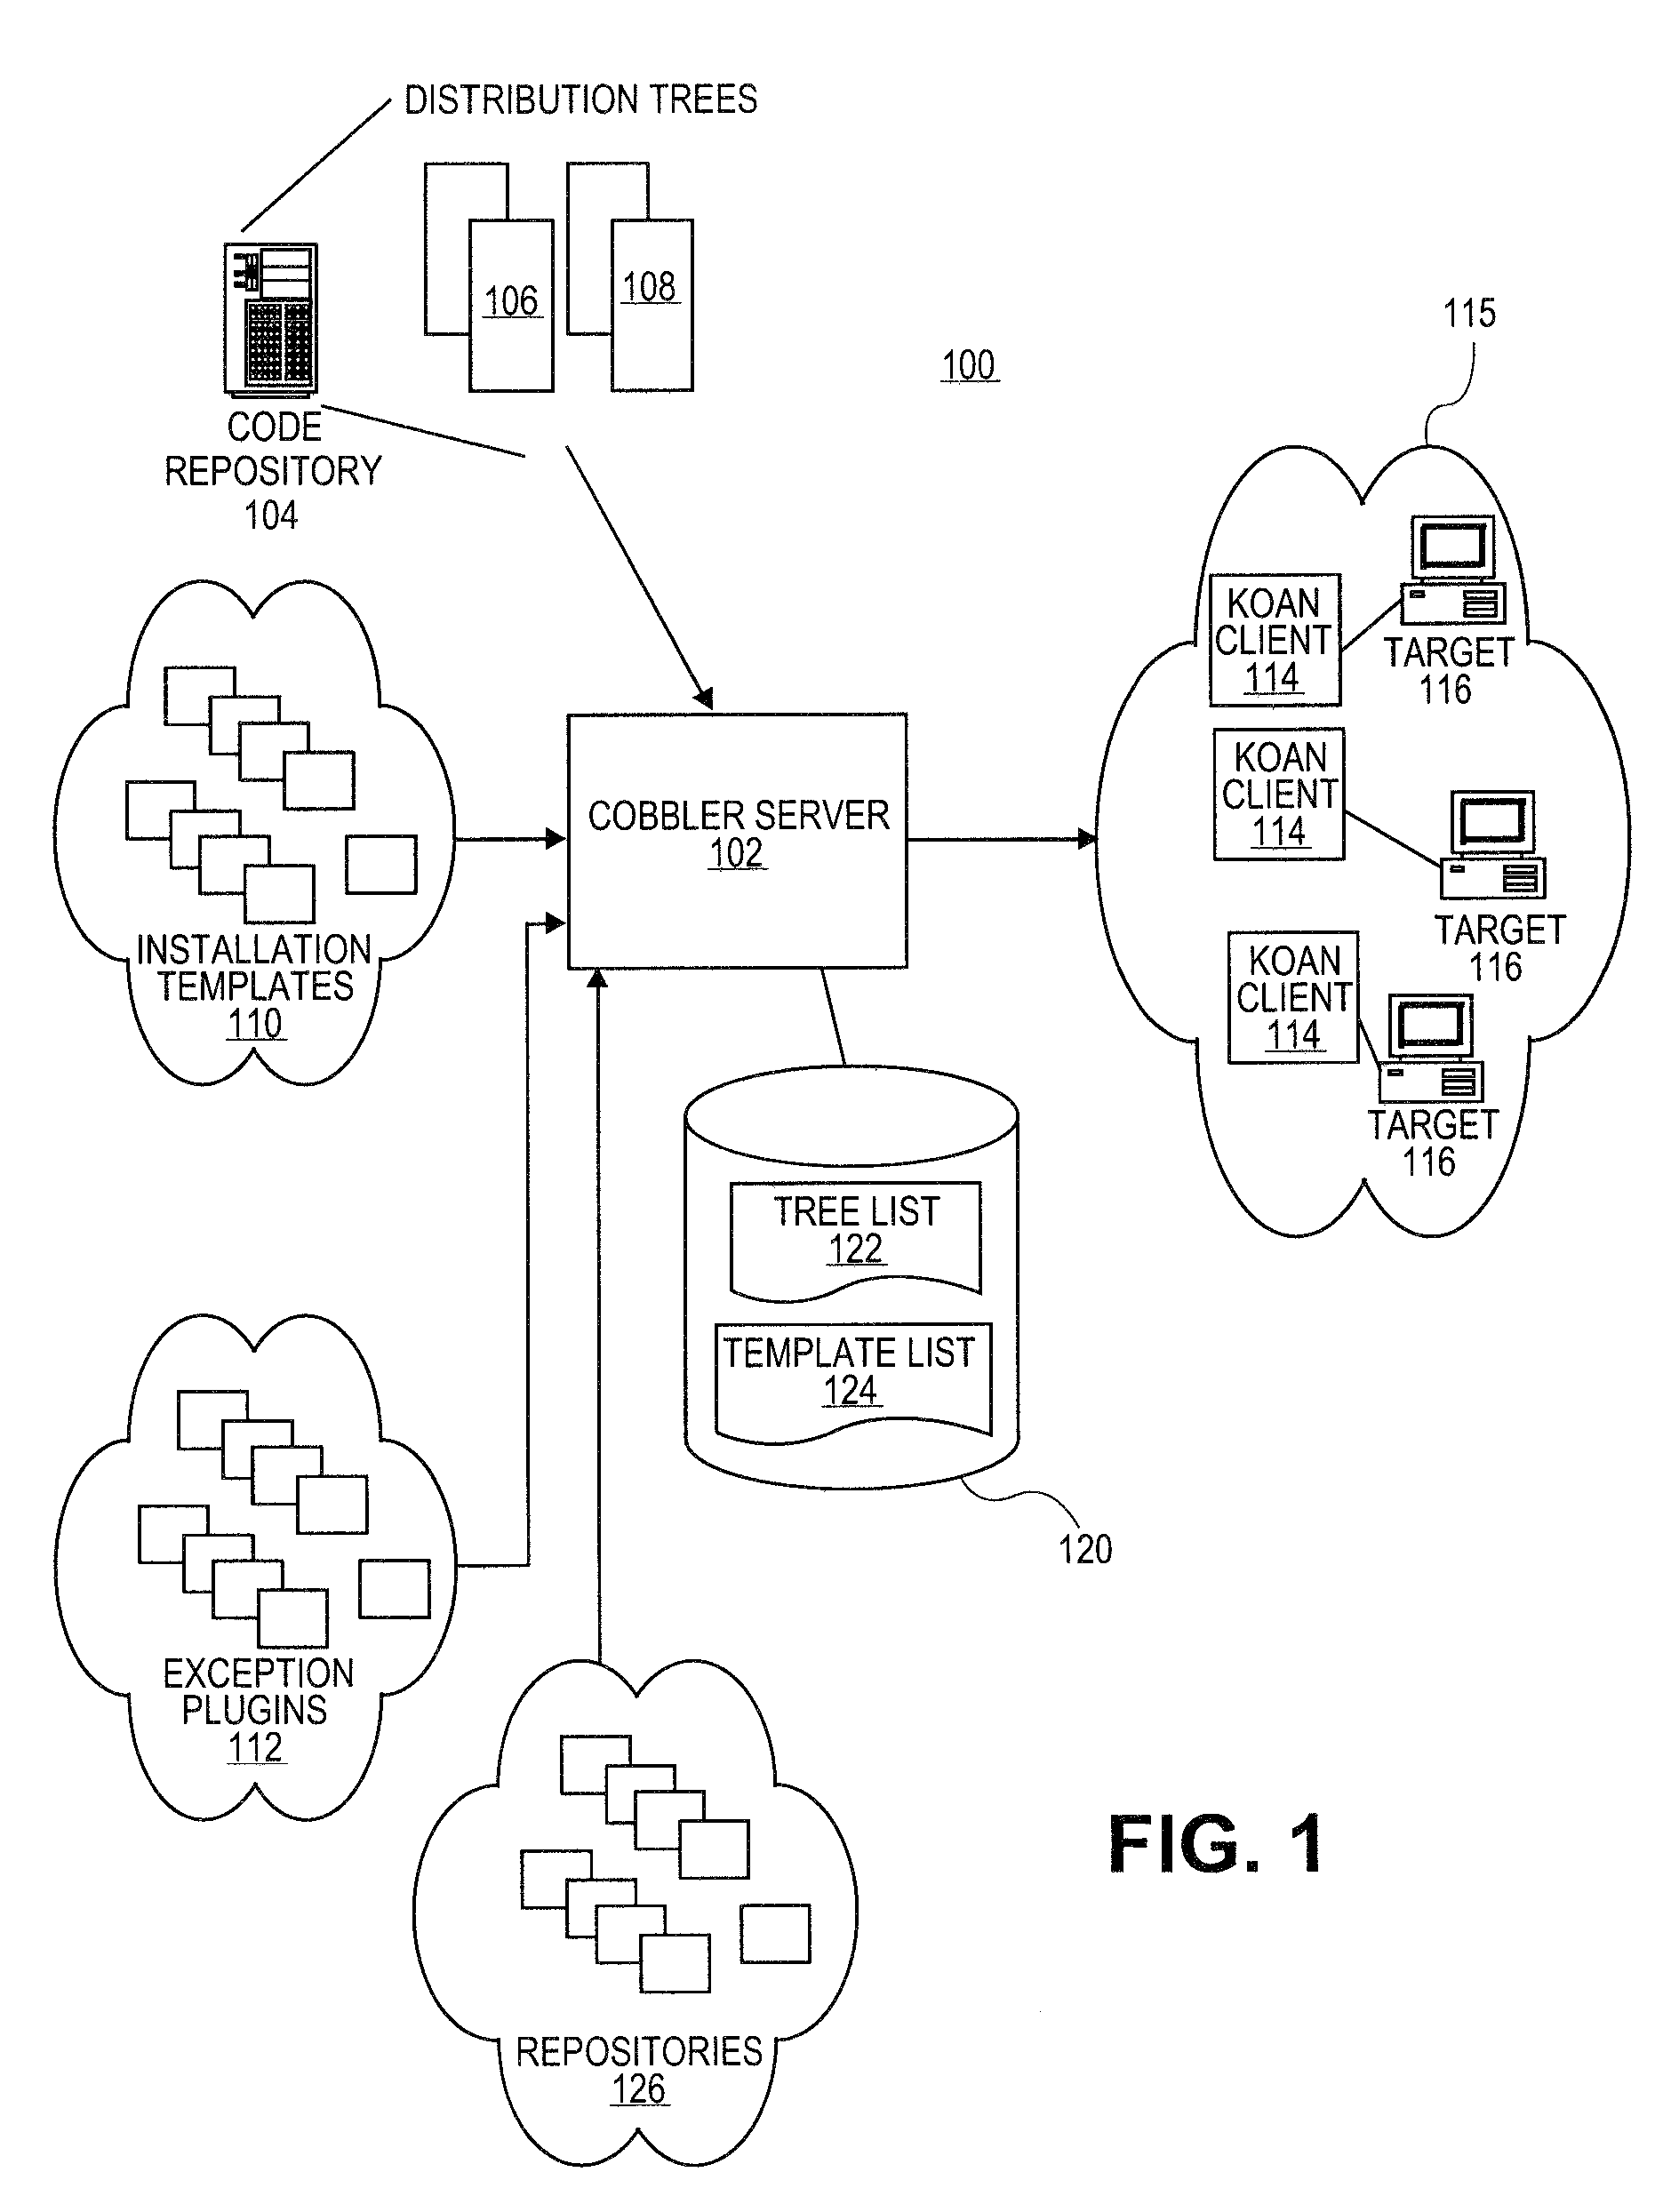 Systems and methods for providing configuration management services from a provisioning server